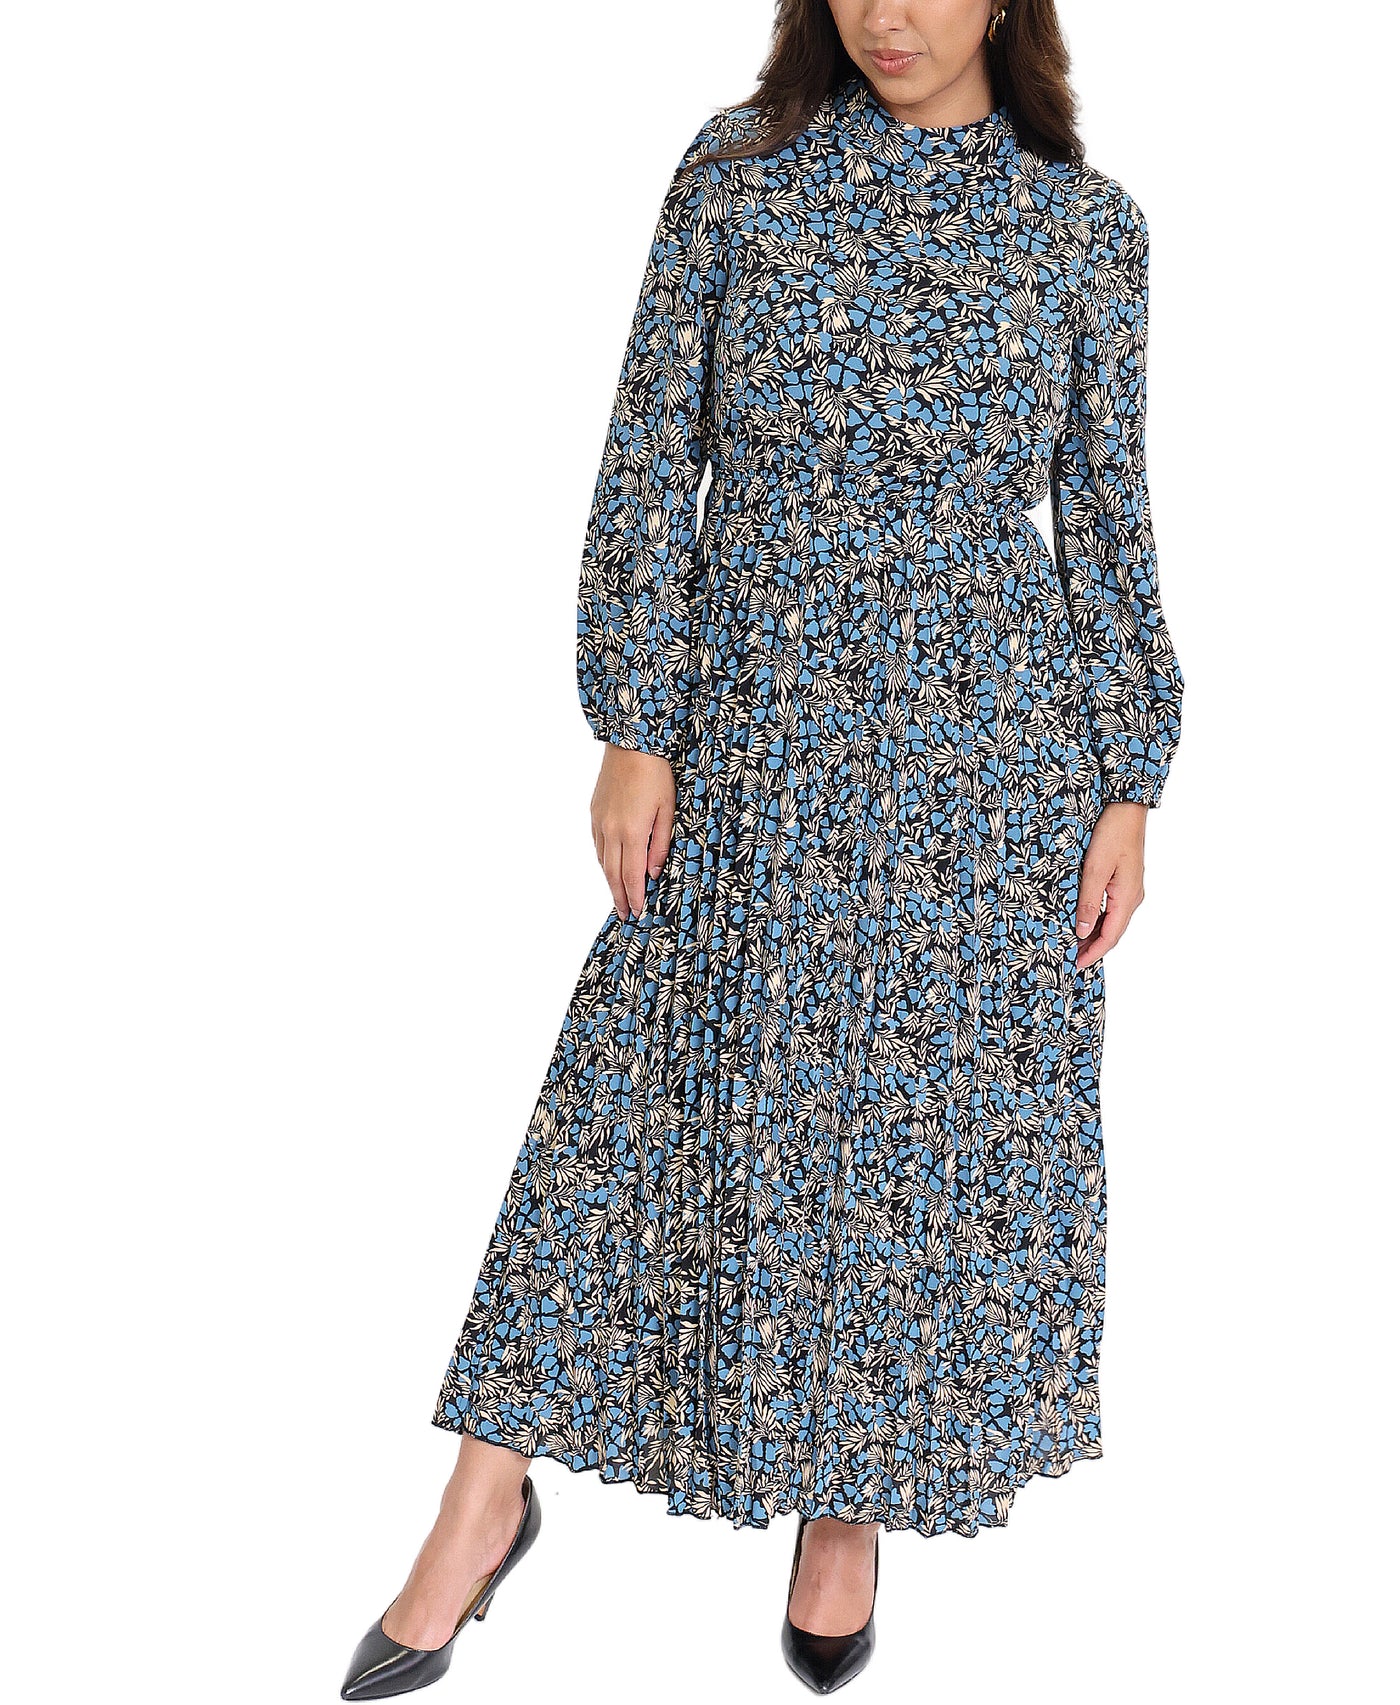 Floral Print Pleated Dress image 1